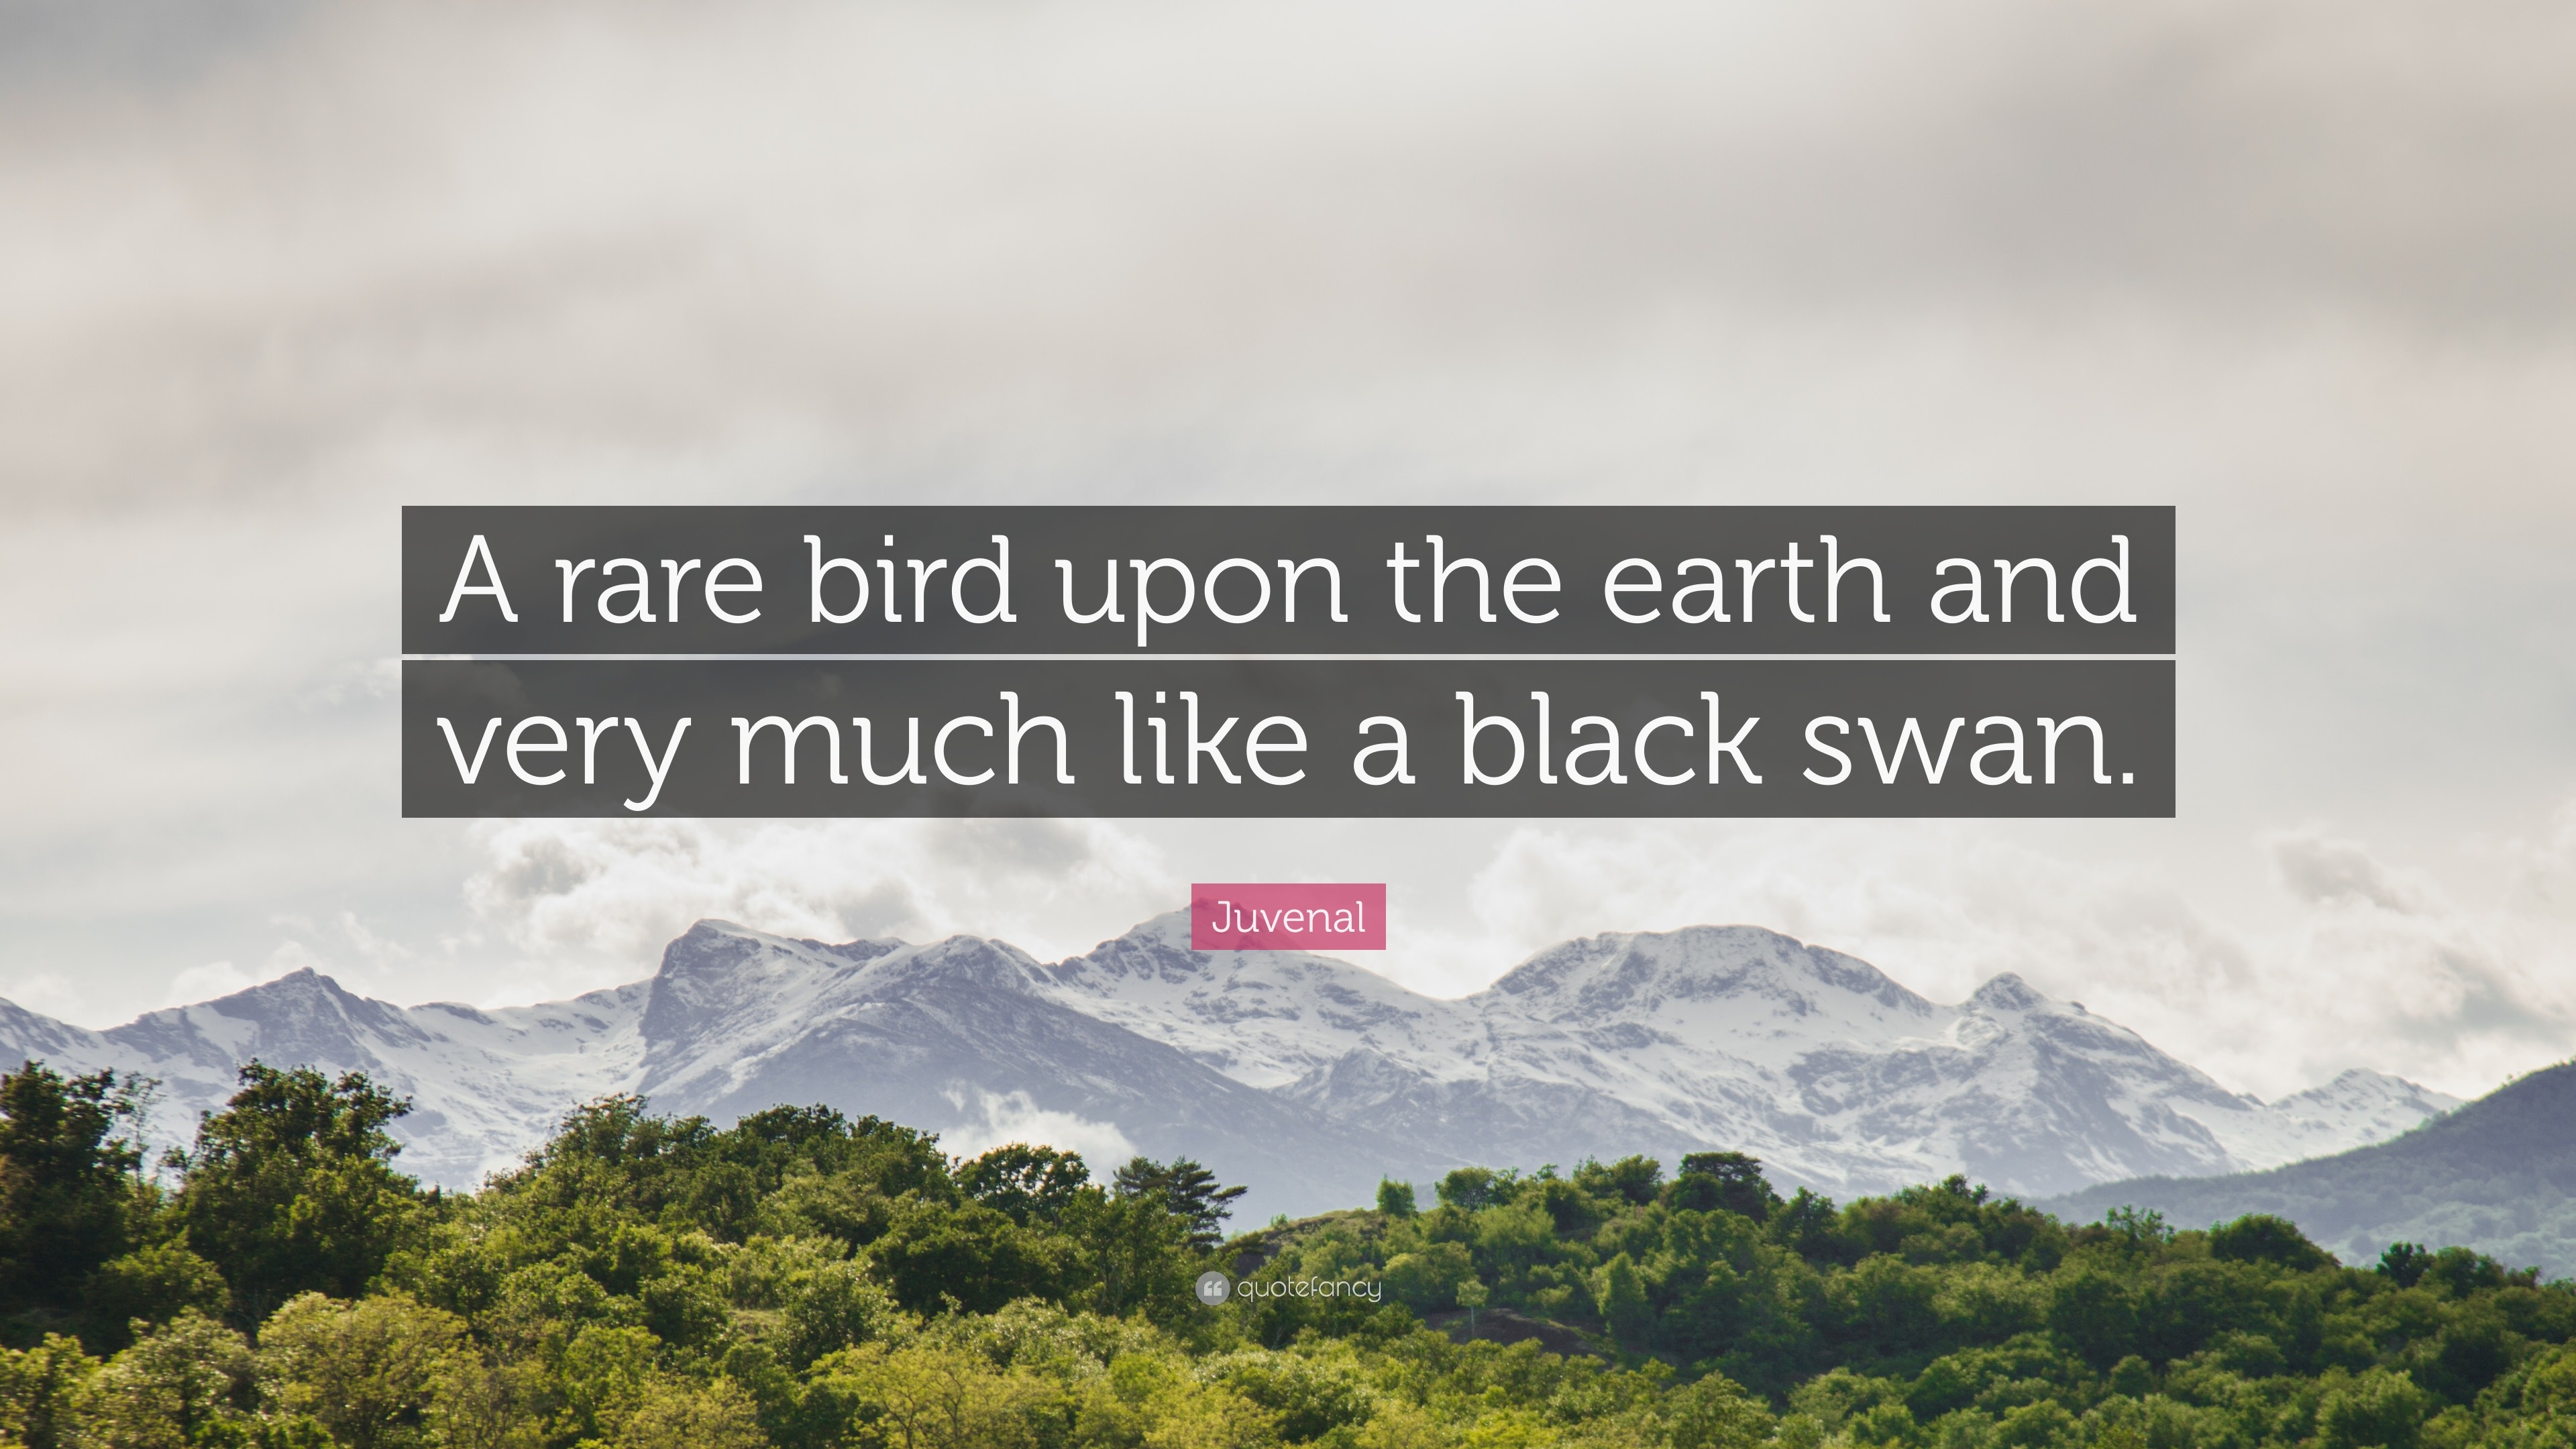 Juvenal Quote: “A rare earth and very much like a black swan.”